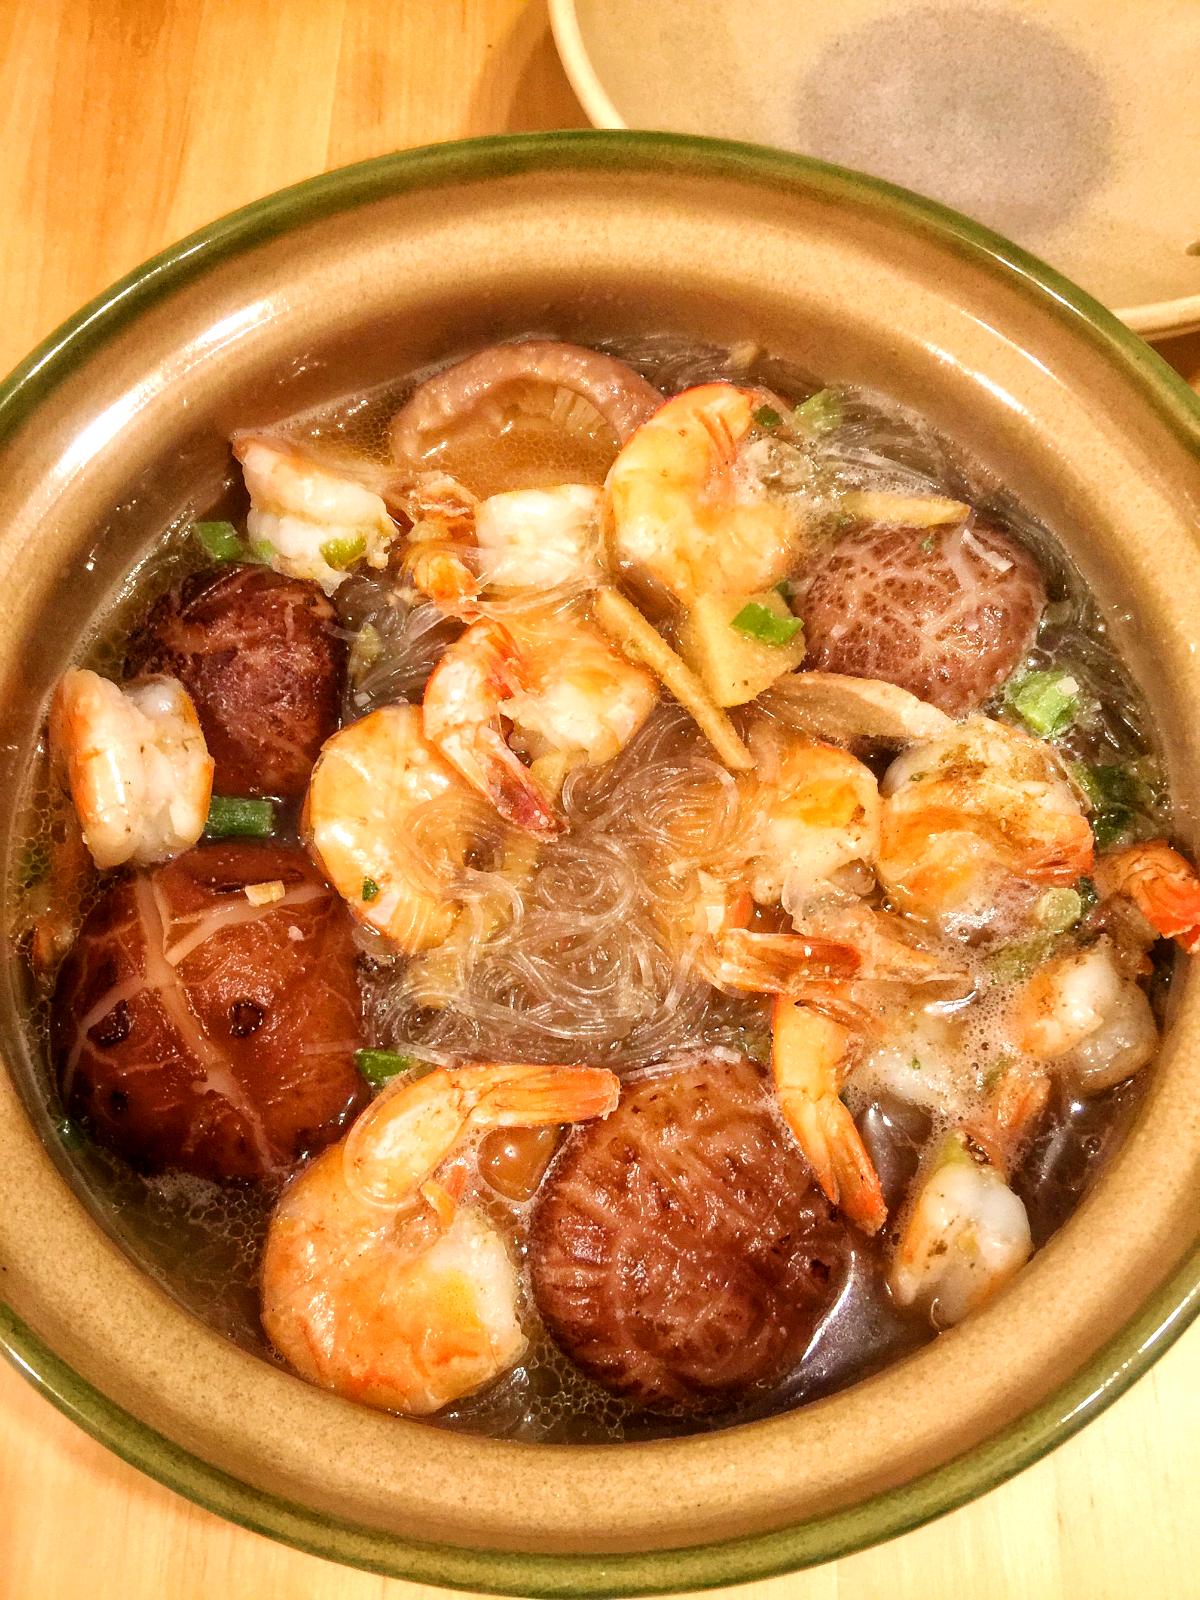 cooked vermicelli noodles, mushrooms, shrimps in clay pot with soup